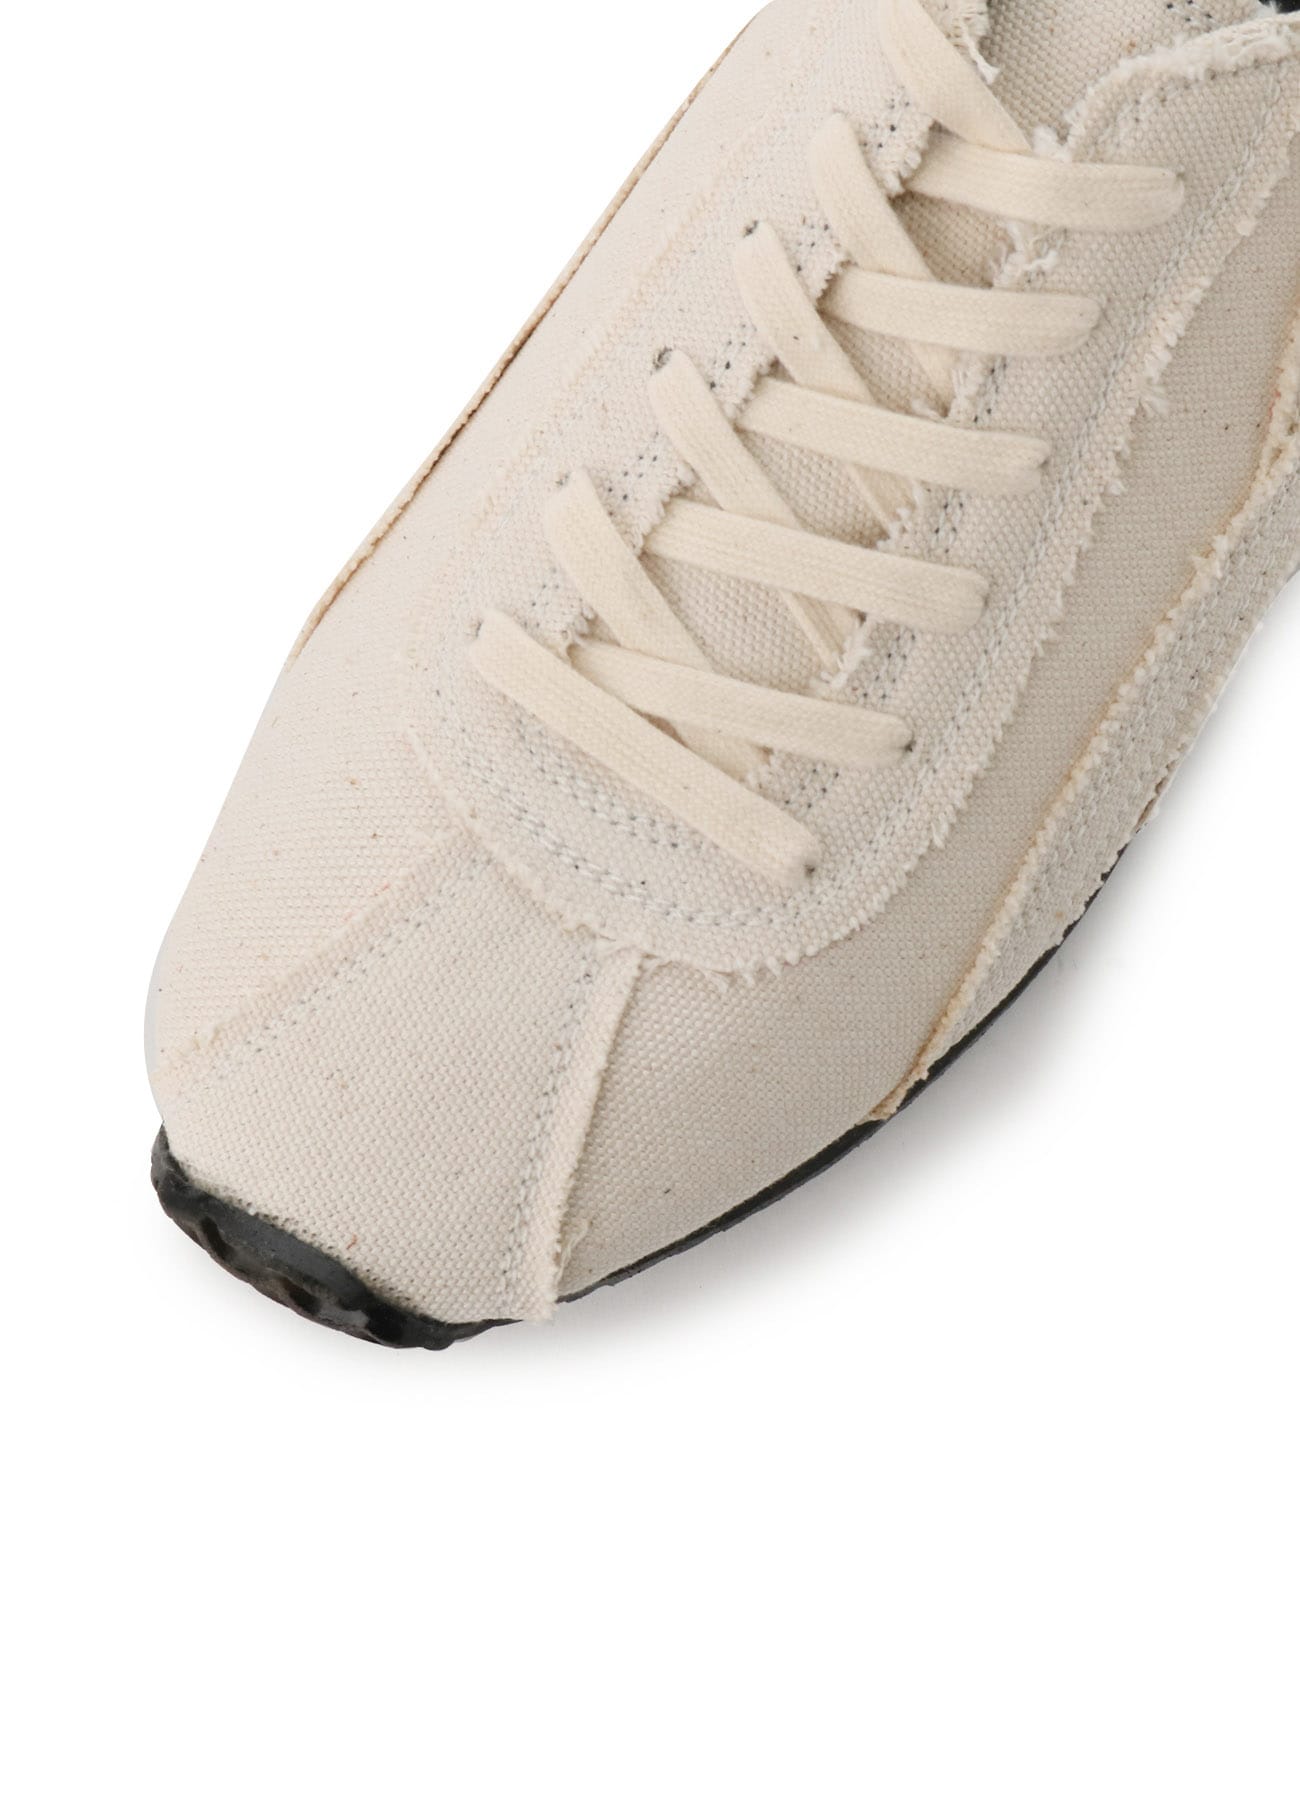 NO.8 CANVAS CUTOFF XLINE RUNNING SHOES(27cm Ivory): Vintage｜THE 